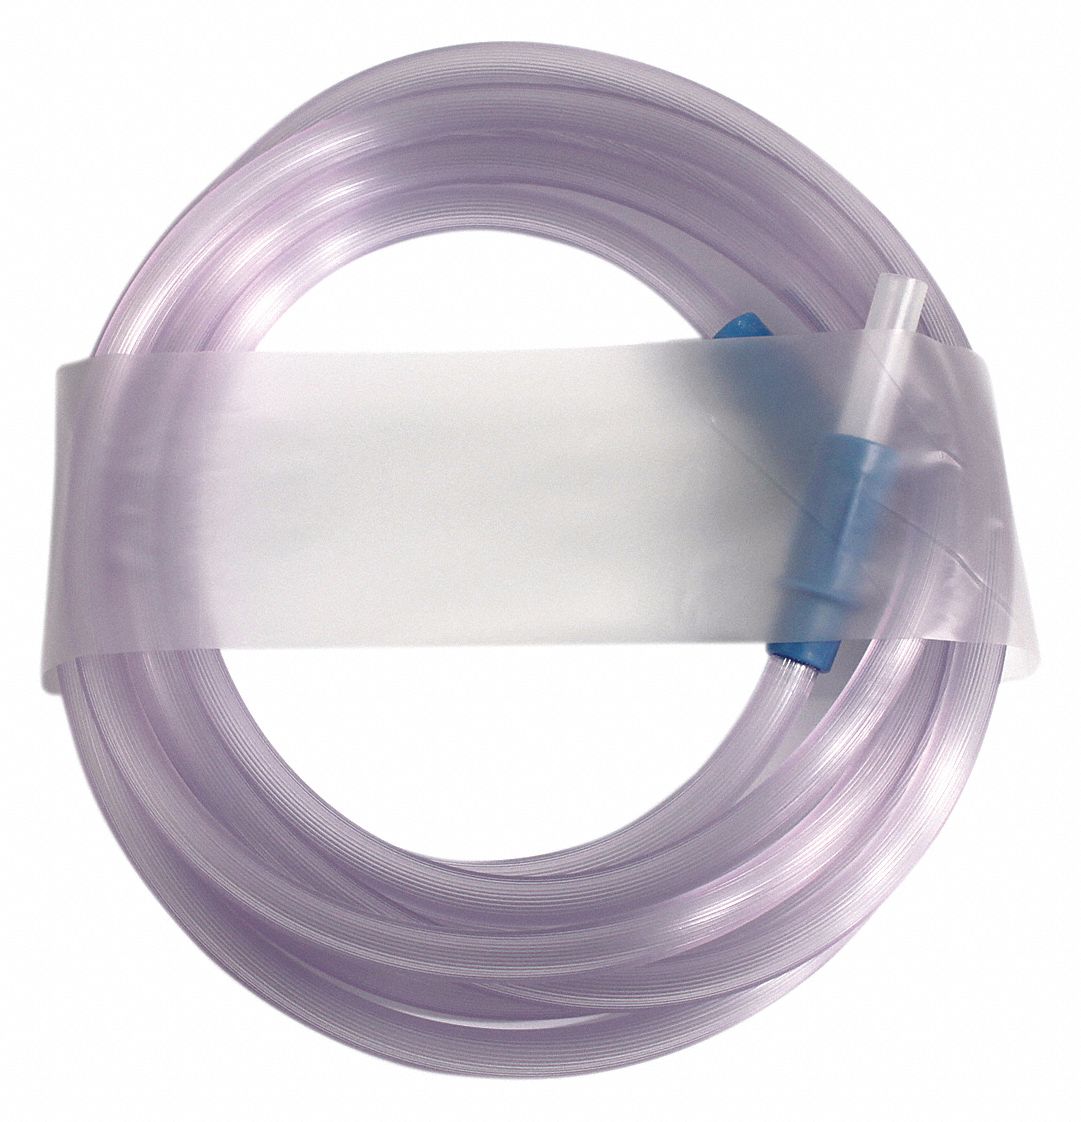 36PW11 - Suction Tubing 4-49/64 in x 254 ft. PK50